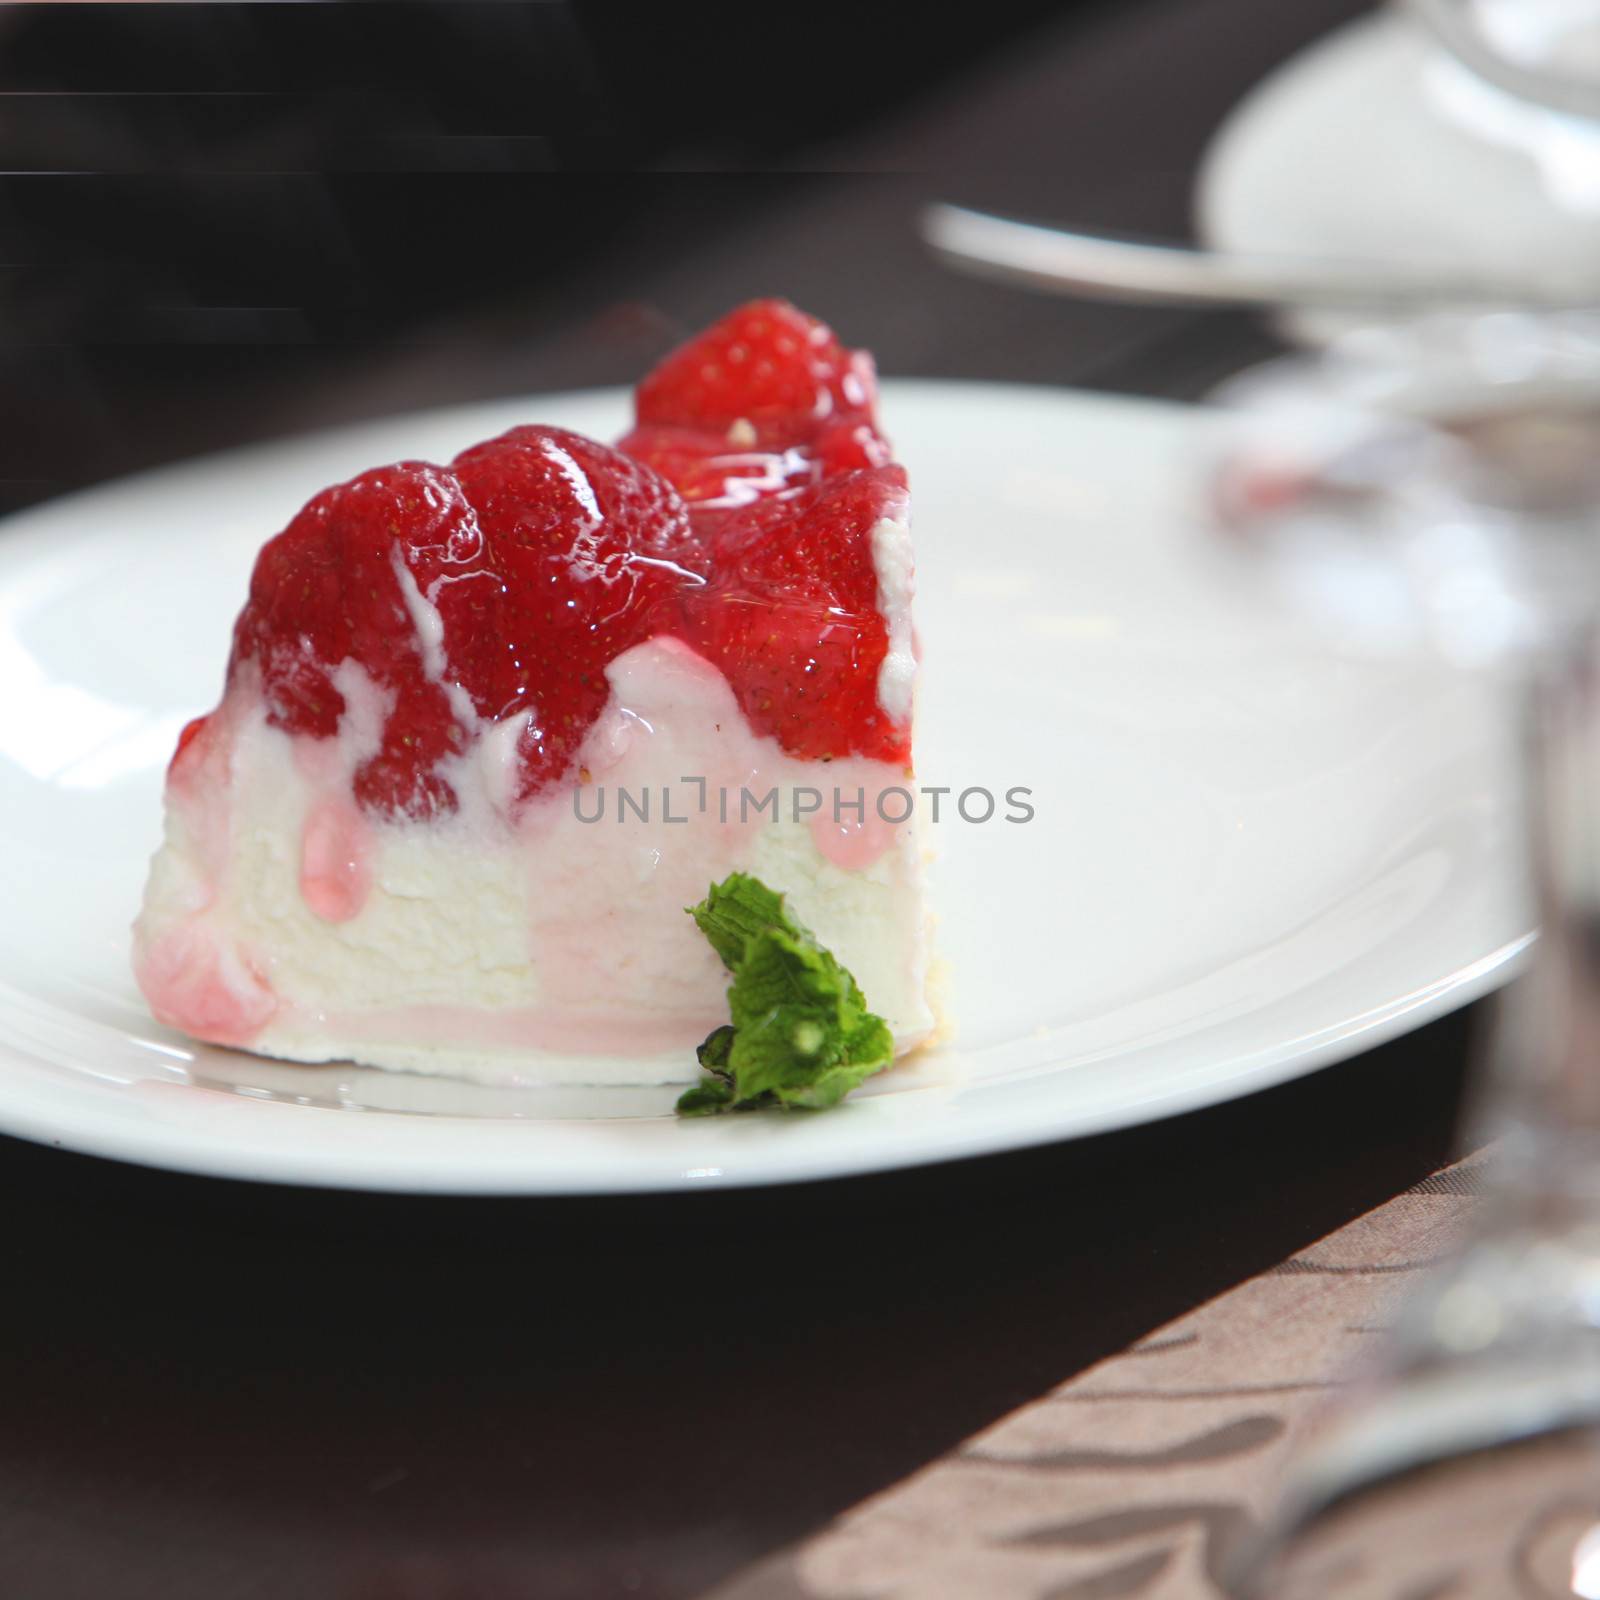 Cheesecake topped with red berries by Farina6000